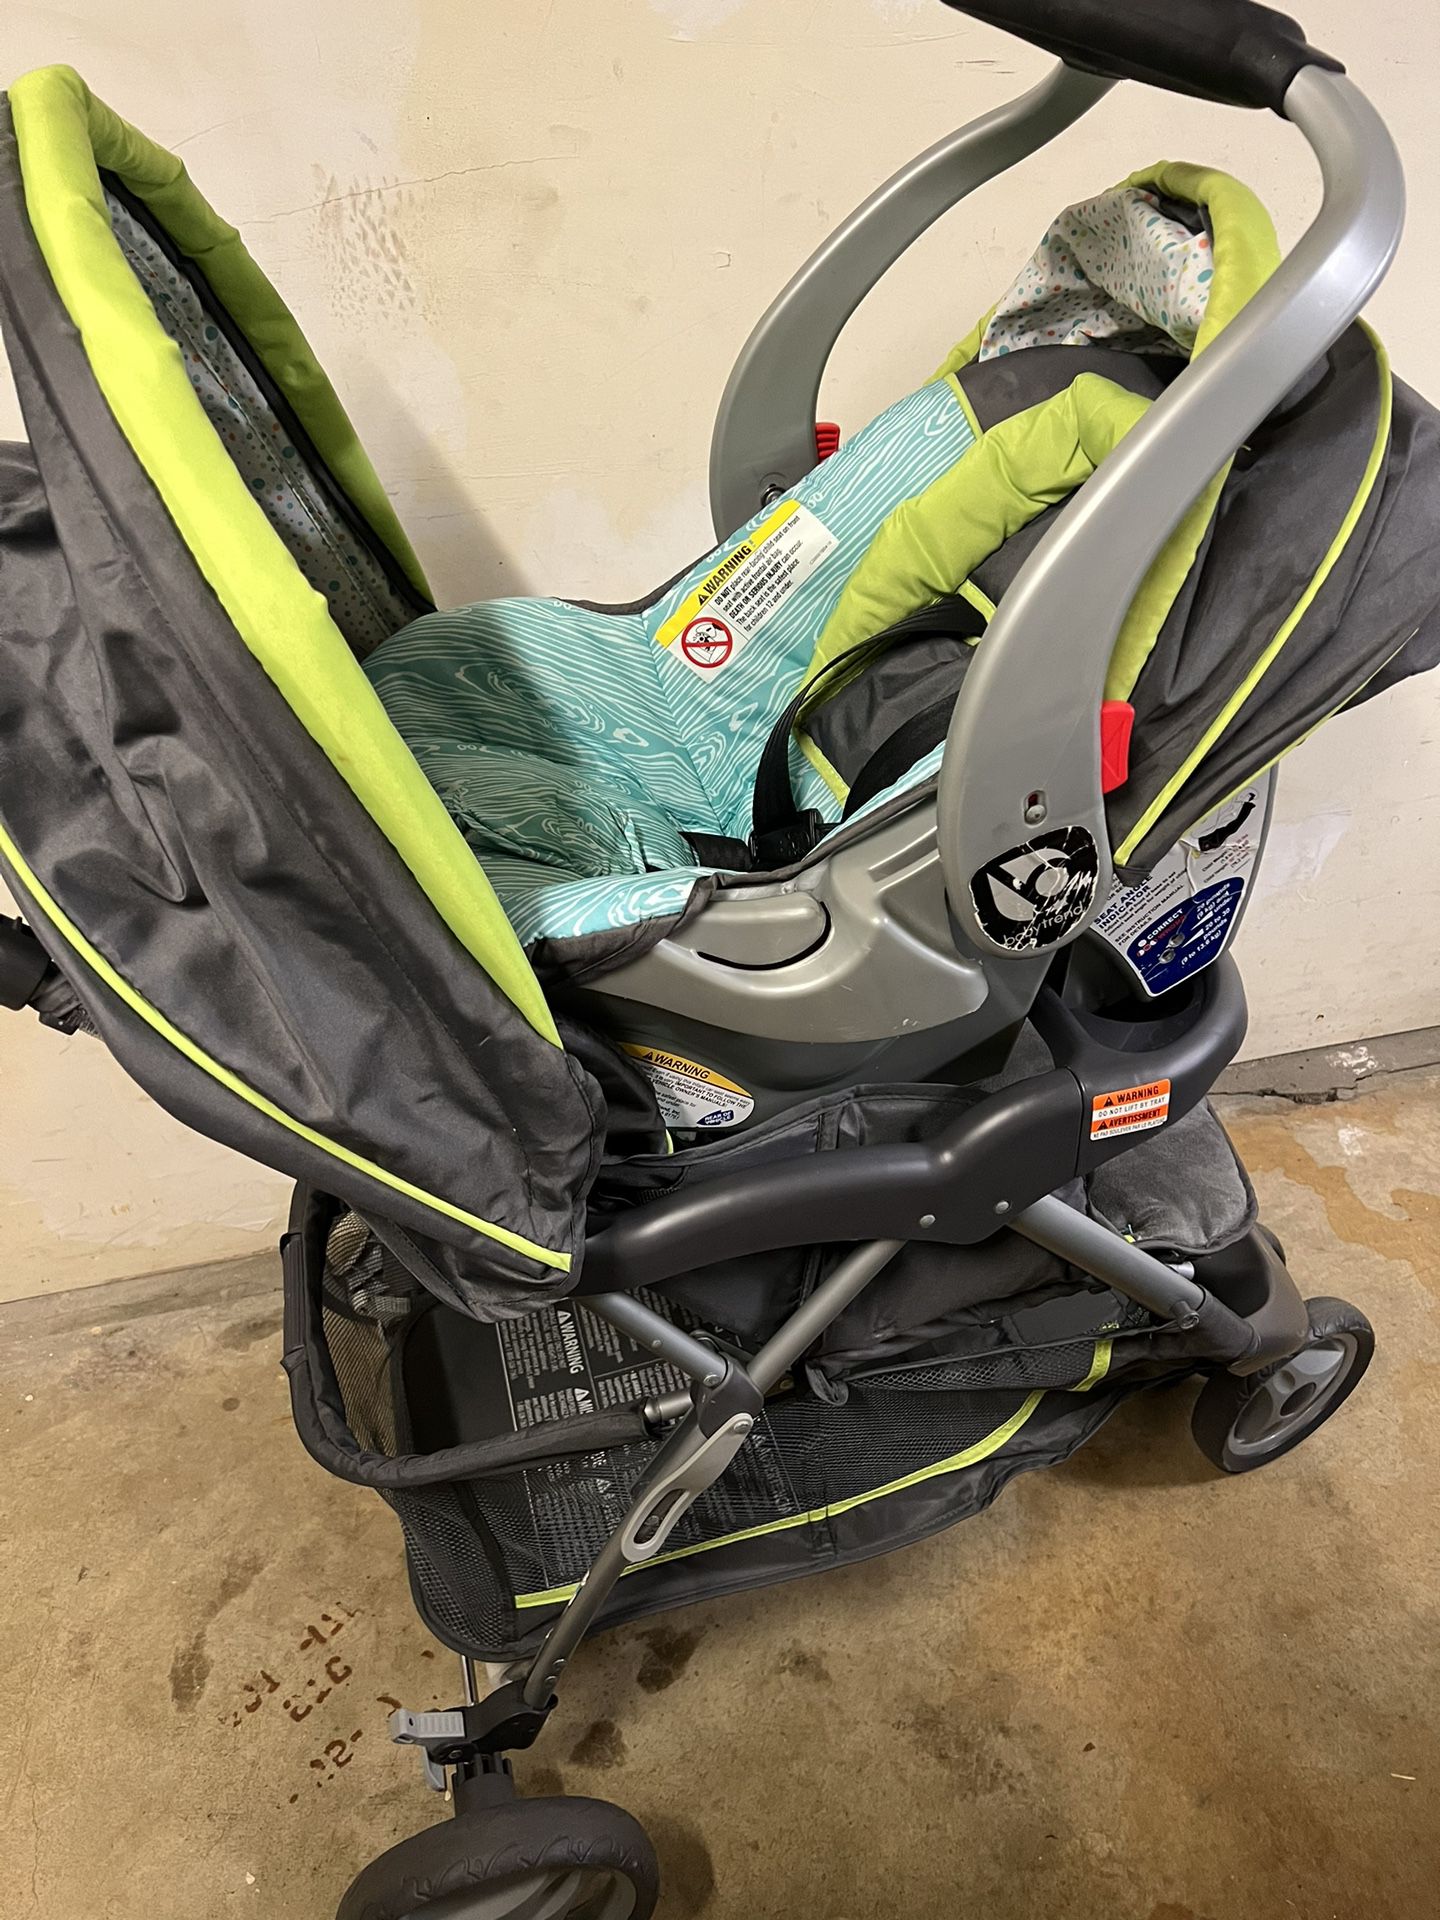 Baby Trend Stoller/ Carseat Combo